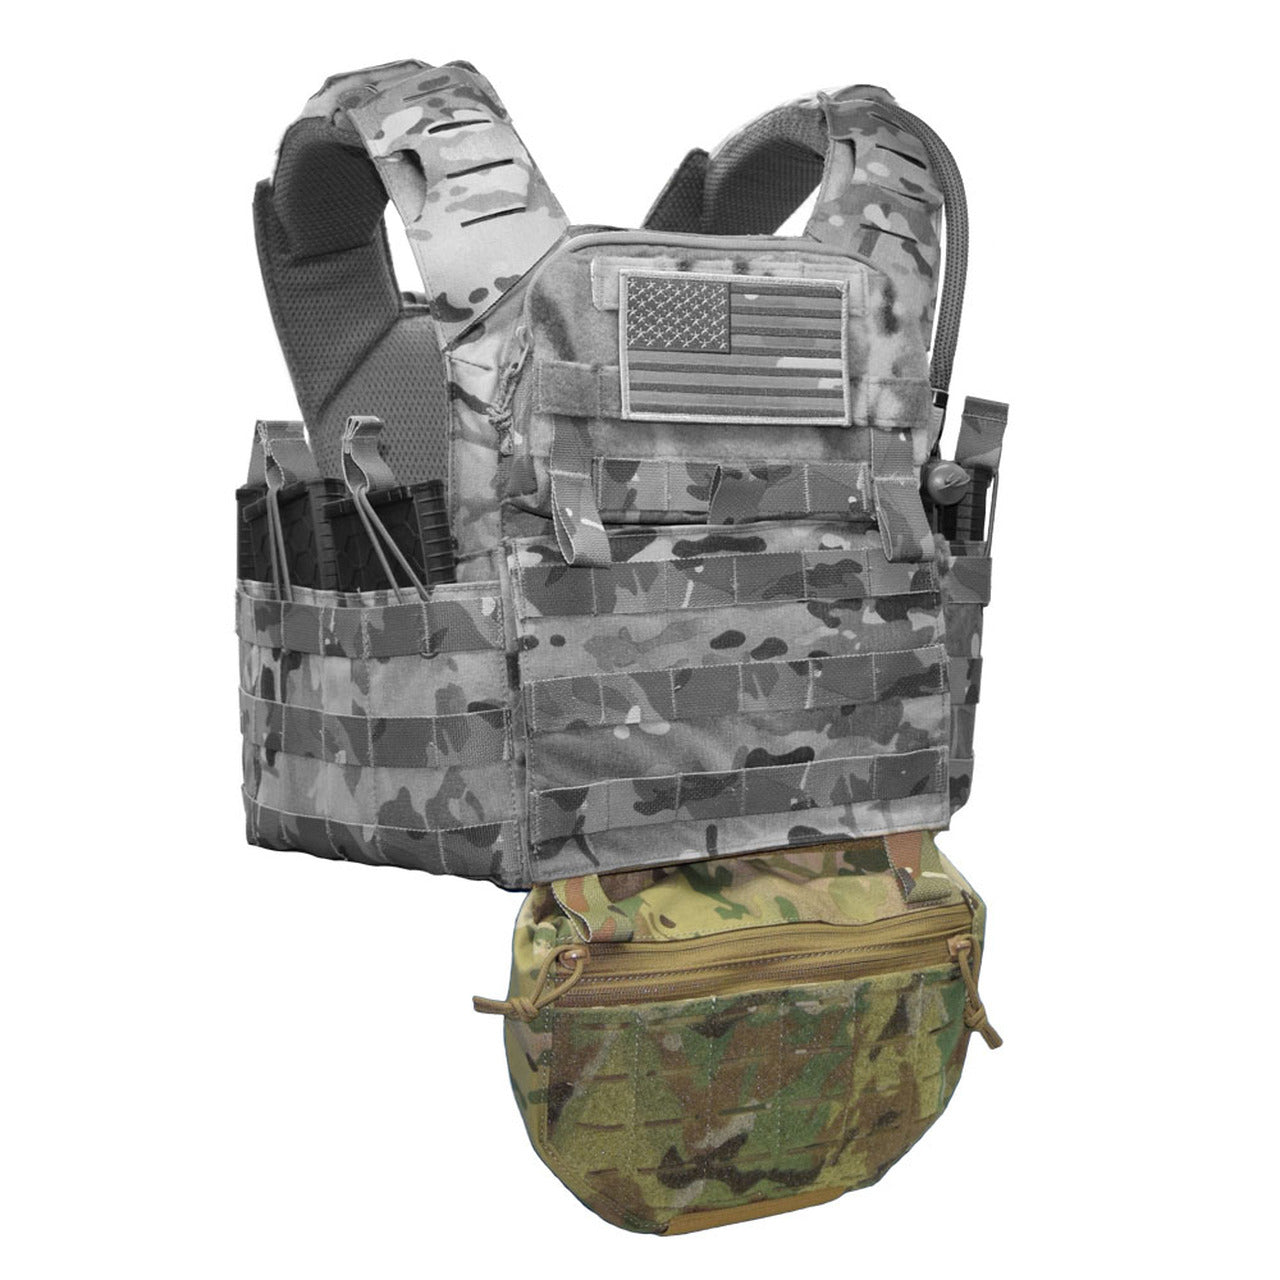 A Shellback Tactical Flap Sac 2.0 plate carrier with an american flag on it.